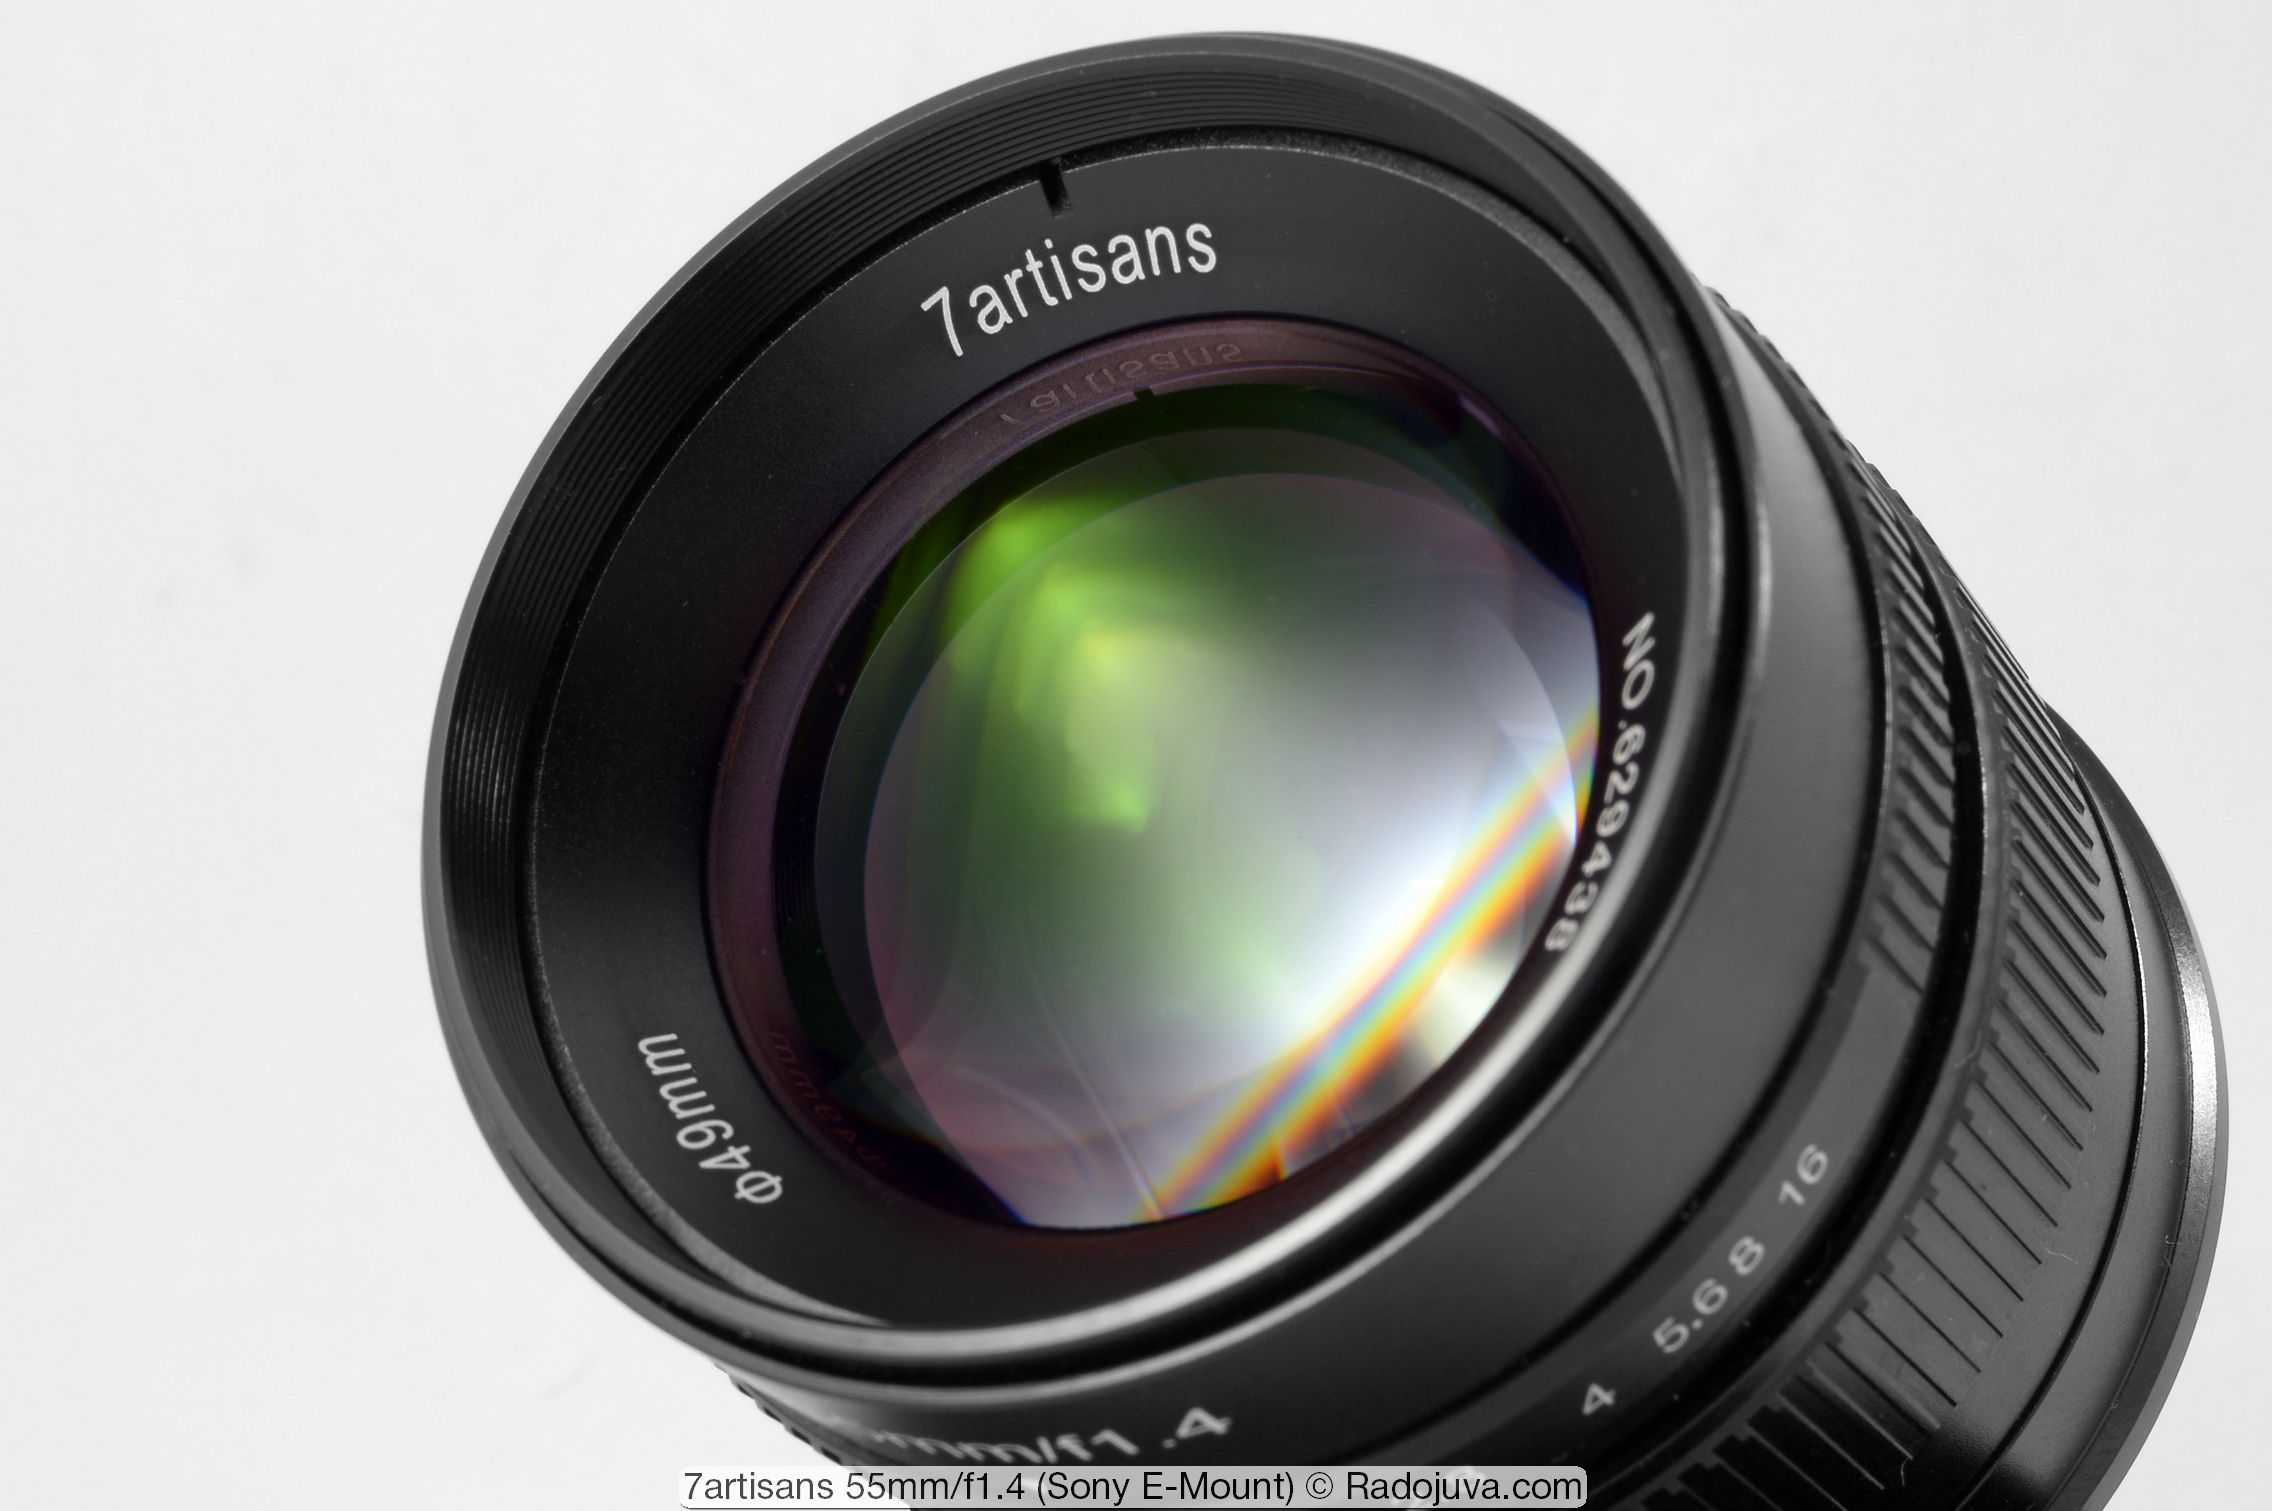 7artisans 55mm F1.4 APS-C Manual Fixed Lens for M4/3 Mount Cameras Panasonic G1 G2 G3 G4 G5 G6 G7 G8 GF1 GF2 GF3 GF5 GF6 GM1 Olympus EMP1 EPM2 E-PL1 E-PL2 E-PL3 E-PL5 Silver 